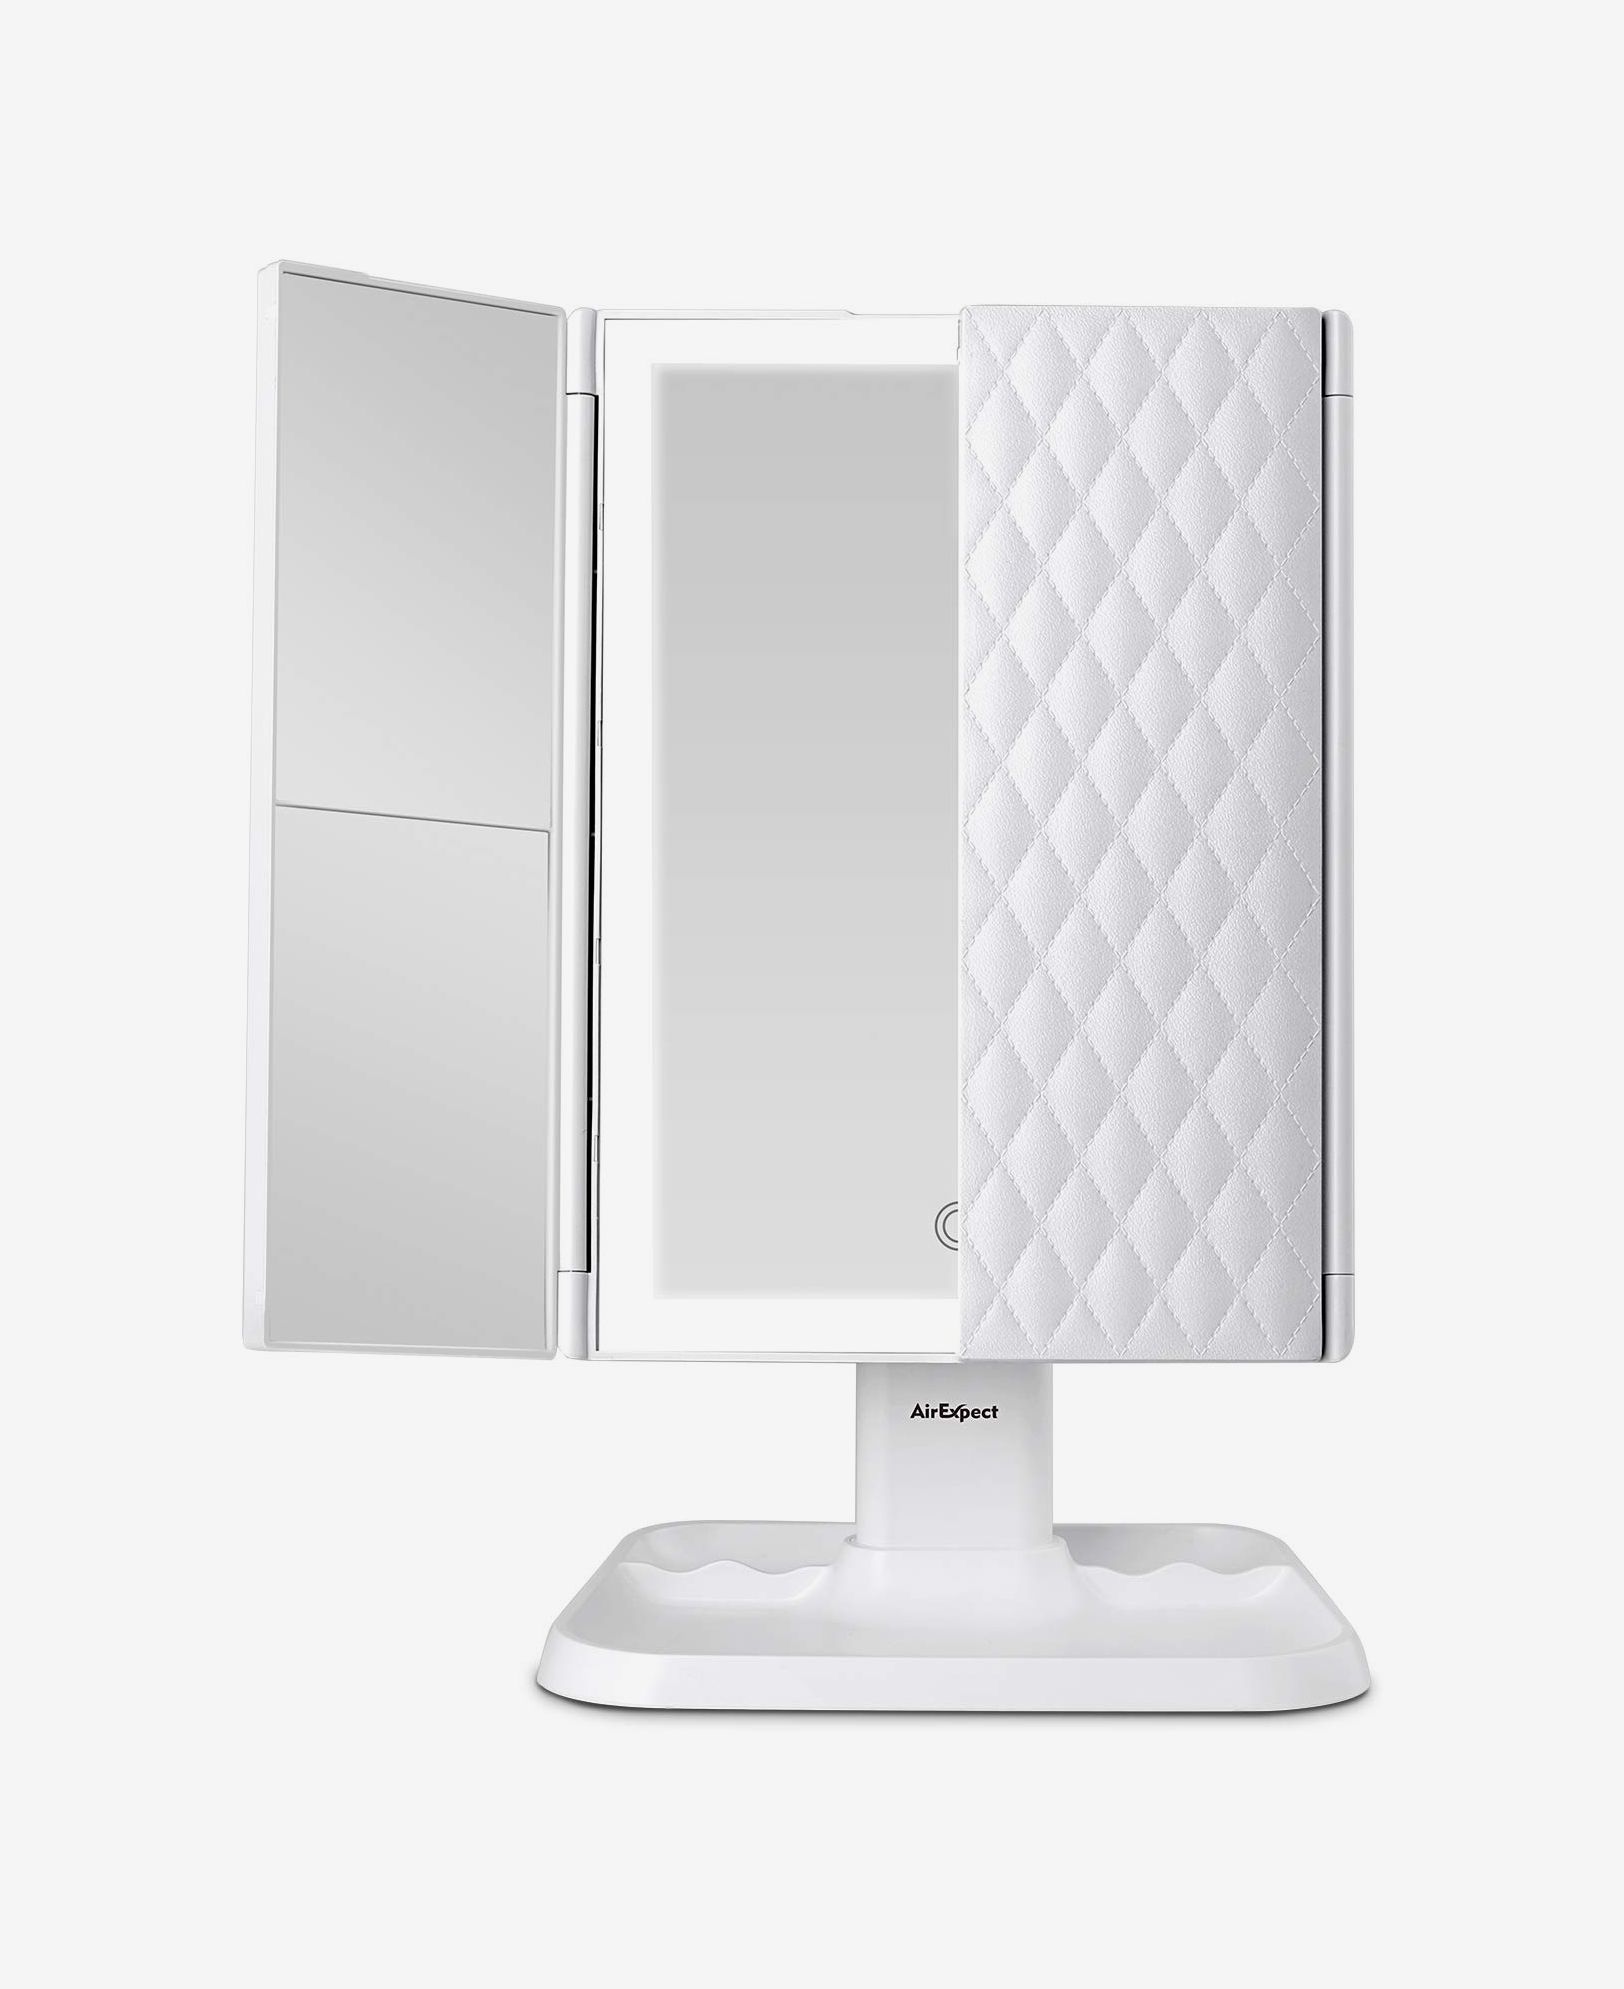 14 Best Lighted Makeup Mirrors 2021, Best Lighted Magnifying Makeup Mirror 2021